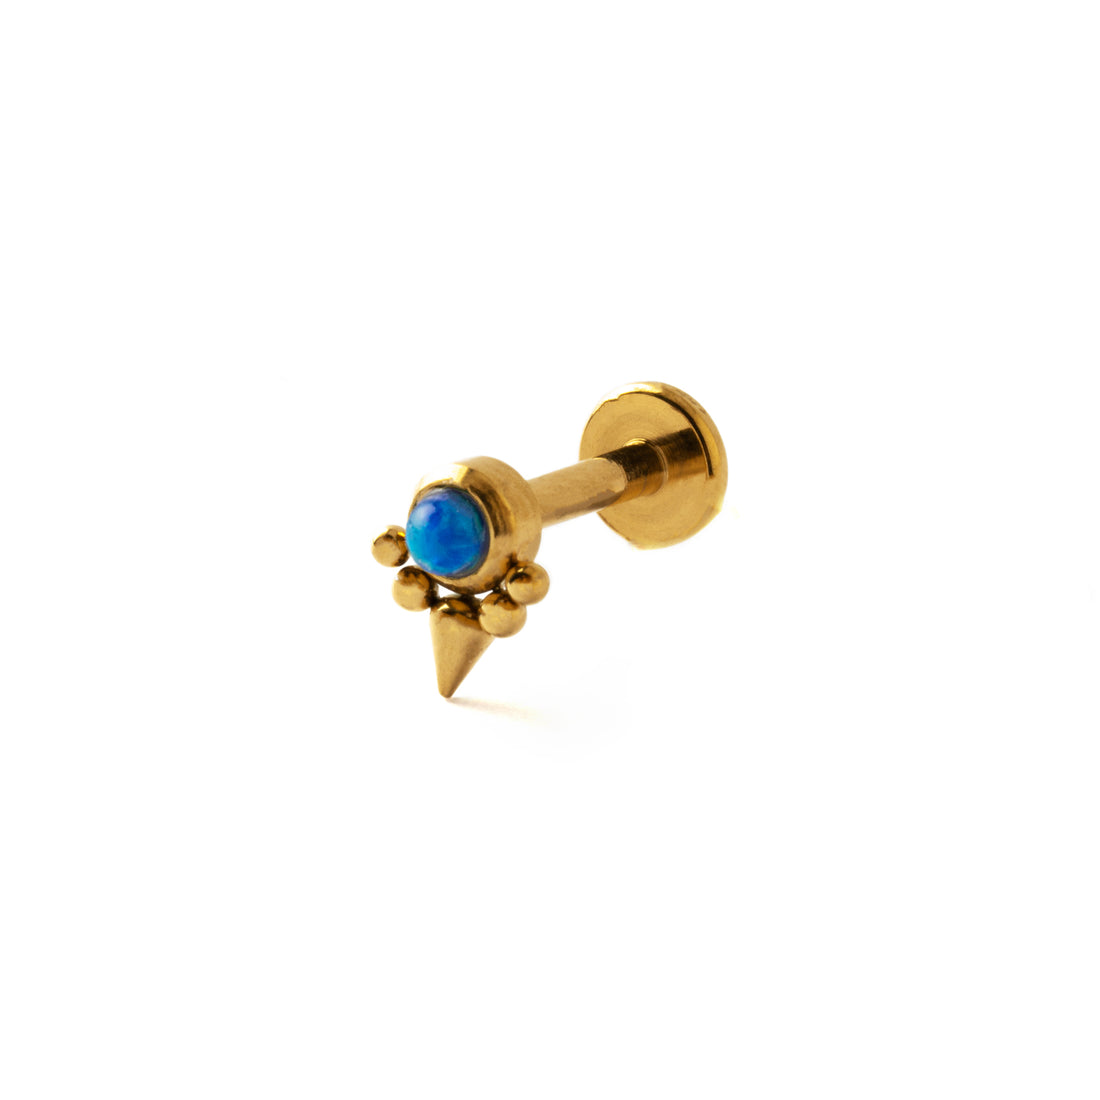 Elvira Gold surgical steel internally threaded Labret with Blue Opal right side view